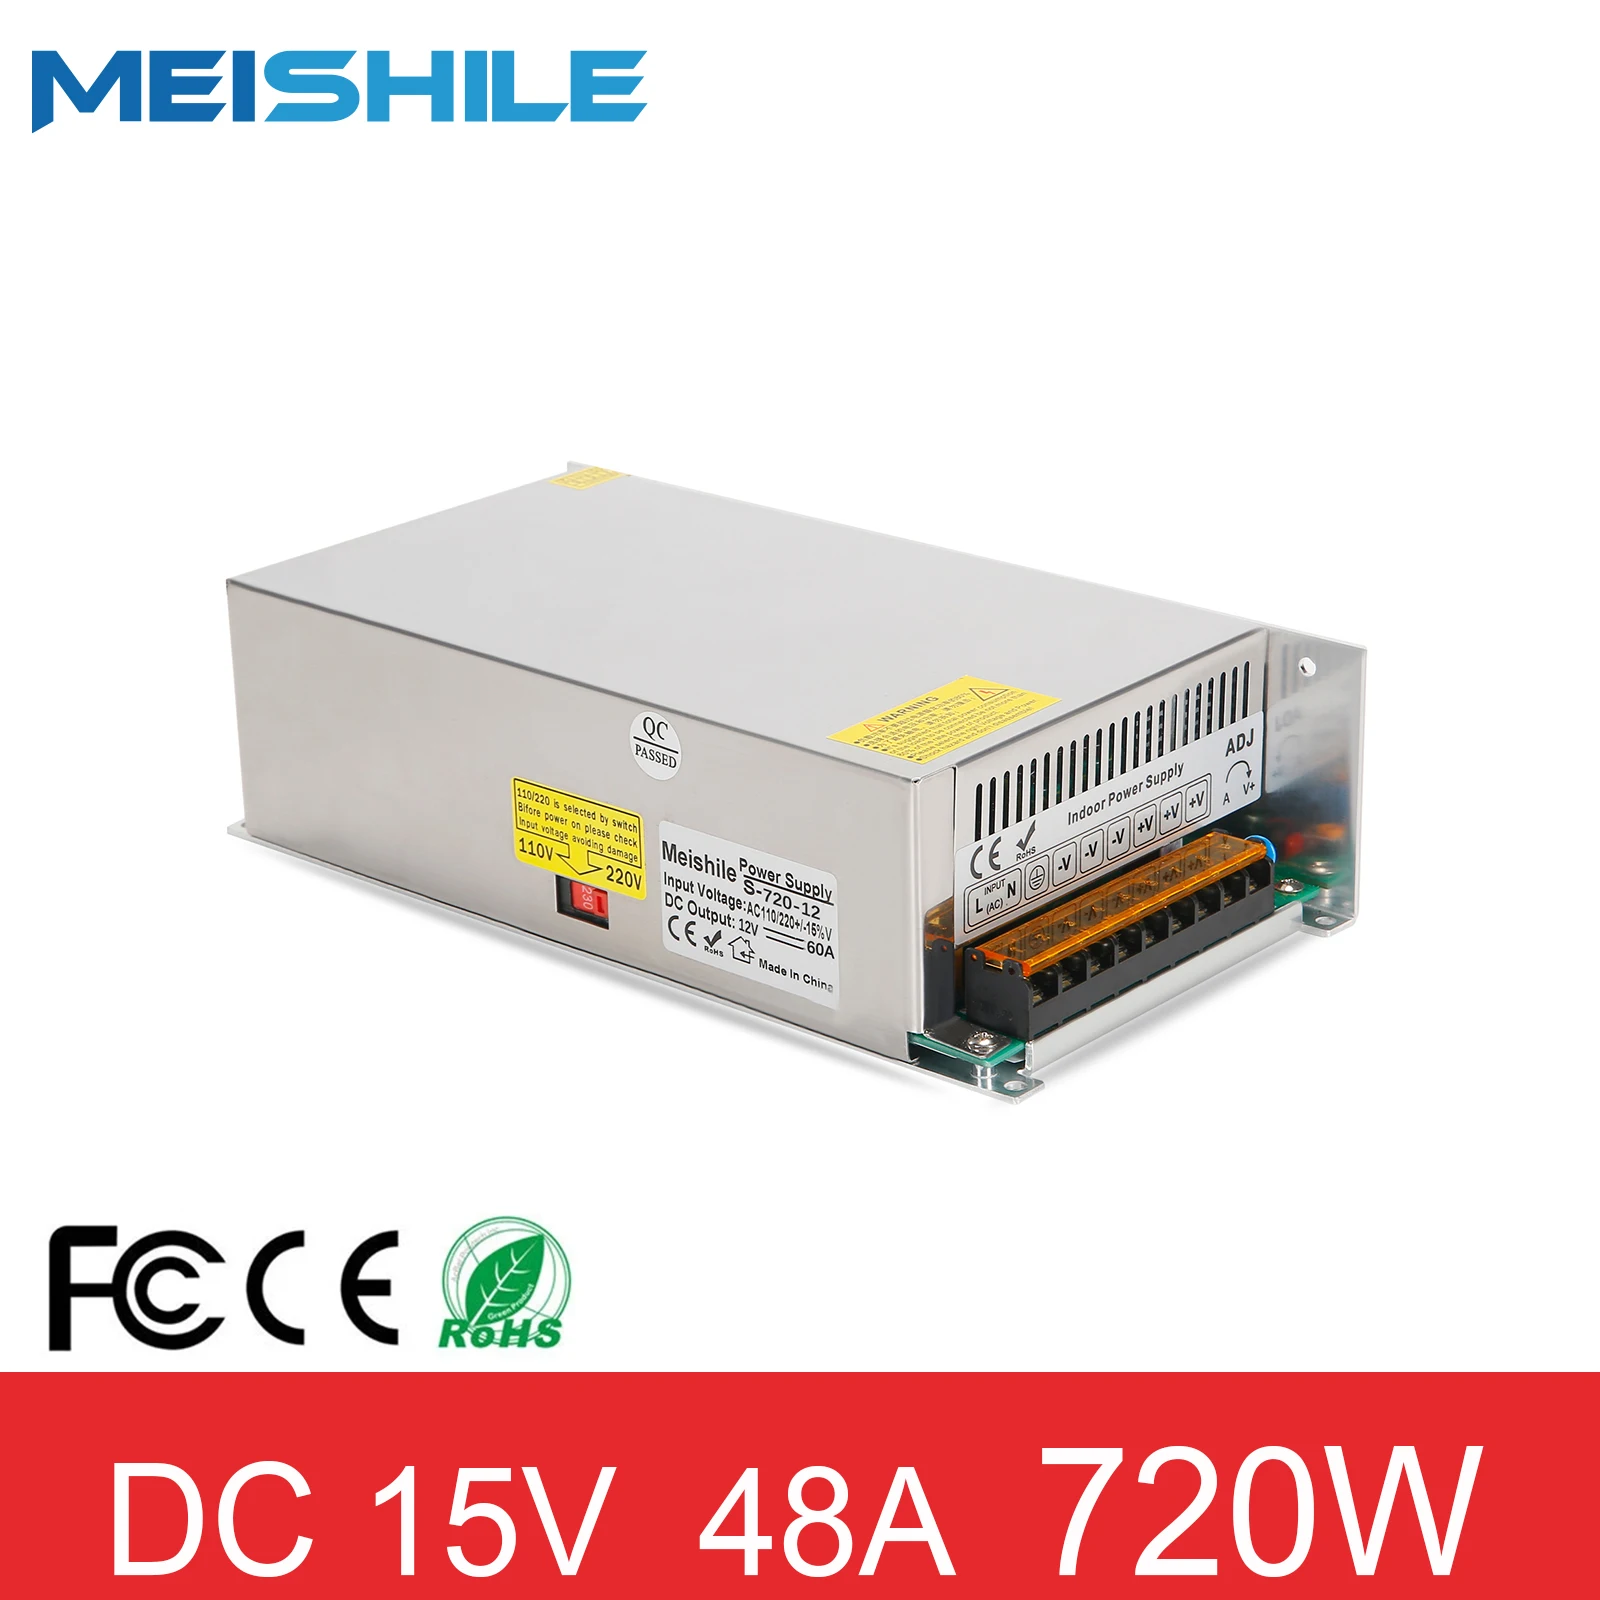 AC to DC 15V 48A 720W Switching Power Supply Drive Transformer for CNC Motor Industrial Electronic Electrical Equipment Etc. |